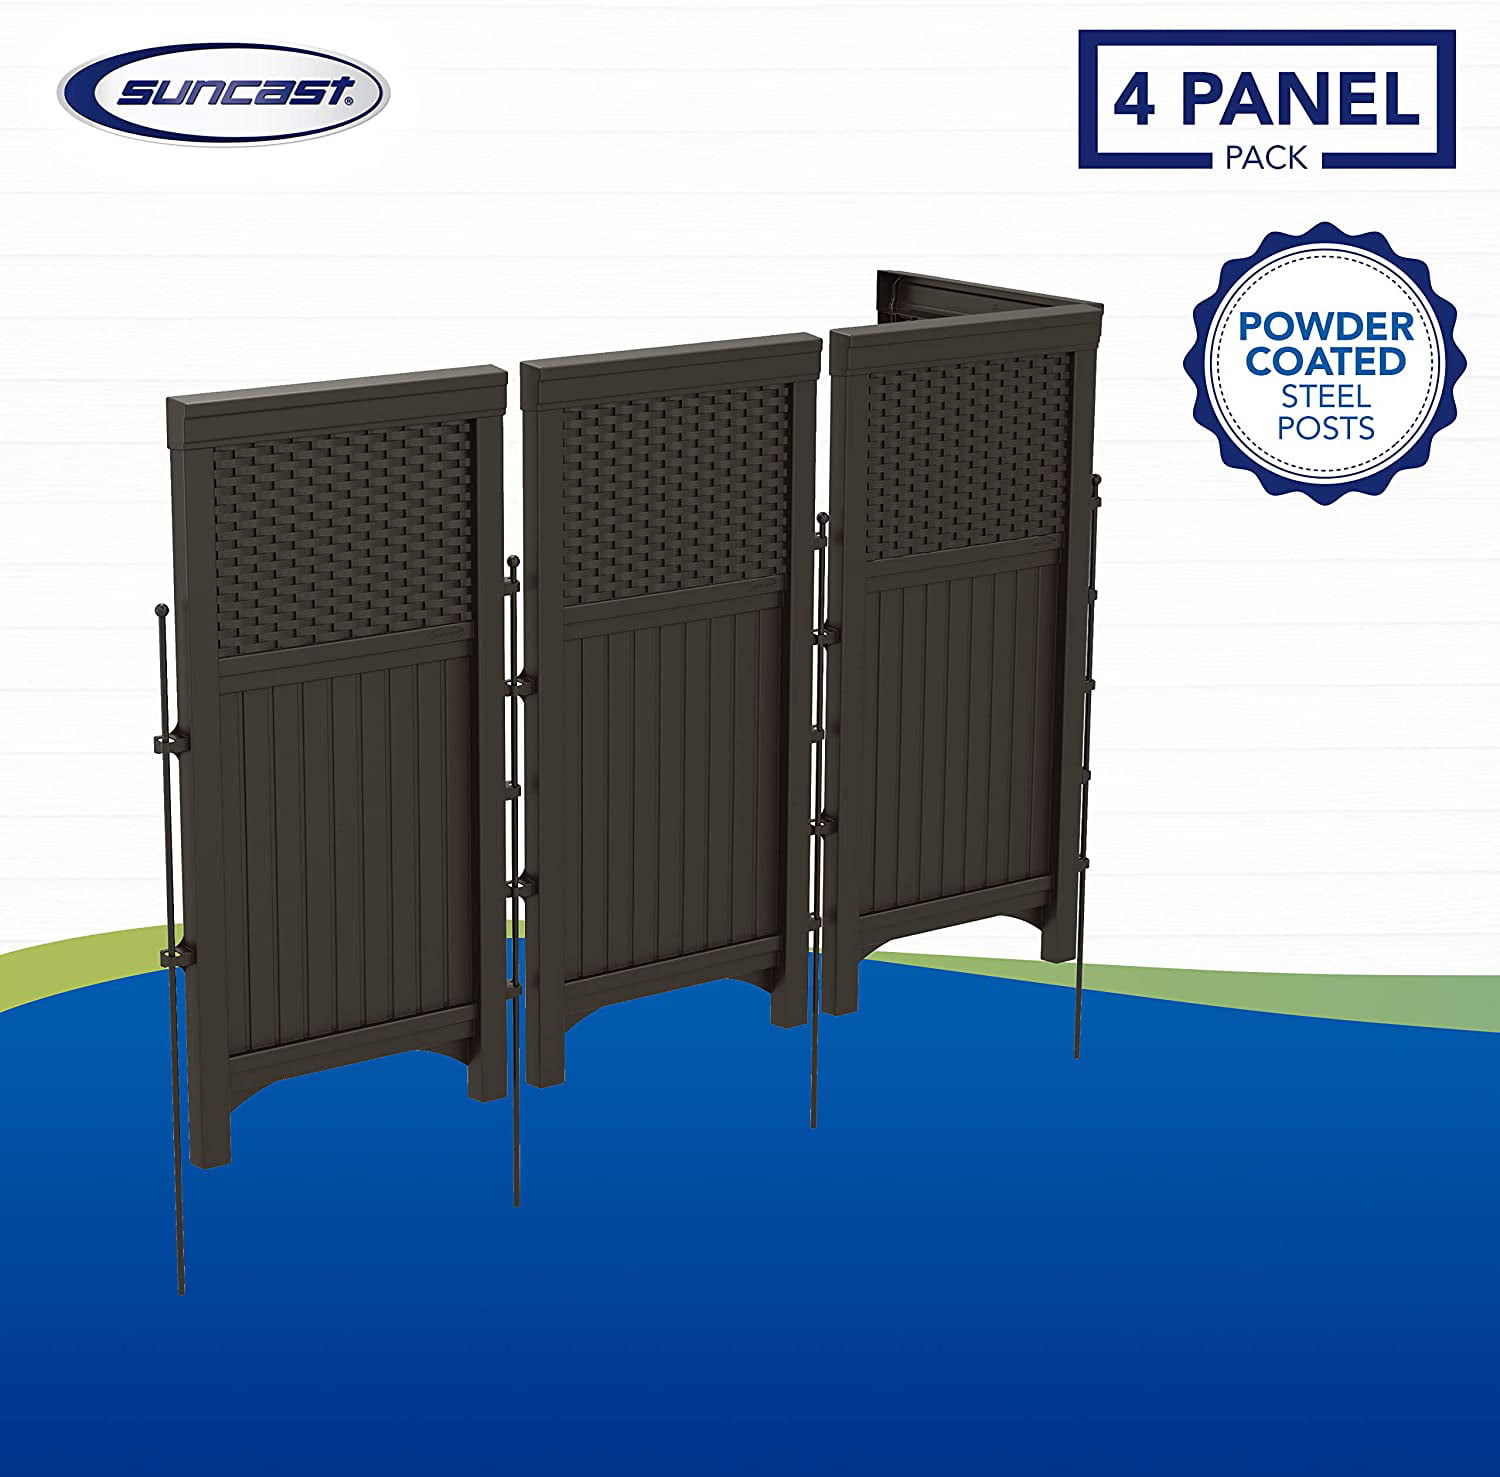 Brown Suncast 4 Panel Outdoor Screen Enclosure Air Conditioners Freestanding Wicker Resin Reversible Panel Outdoor Screen Perfect for Concealing Garbage Cans 